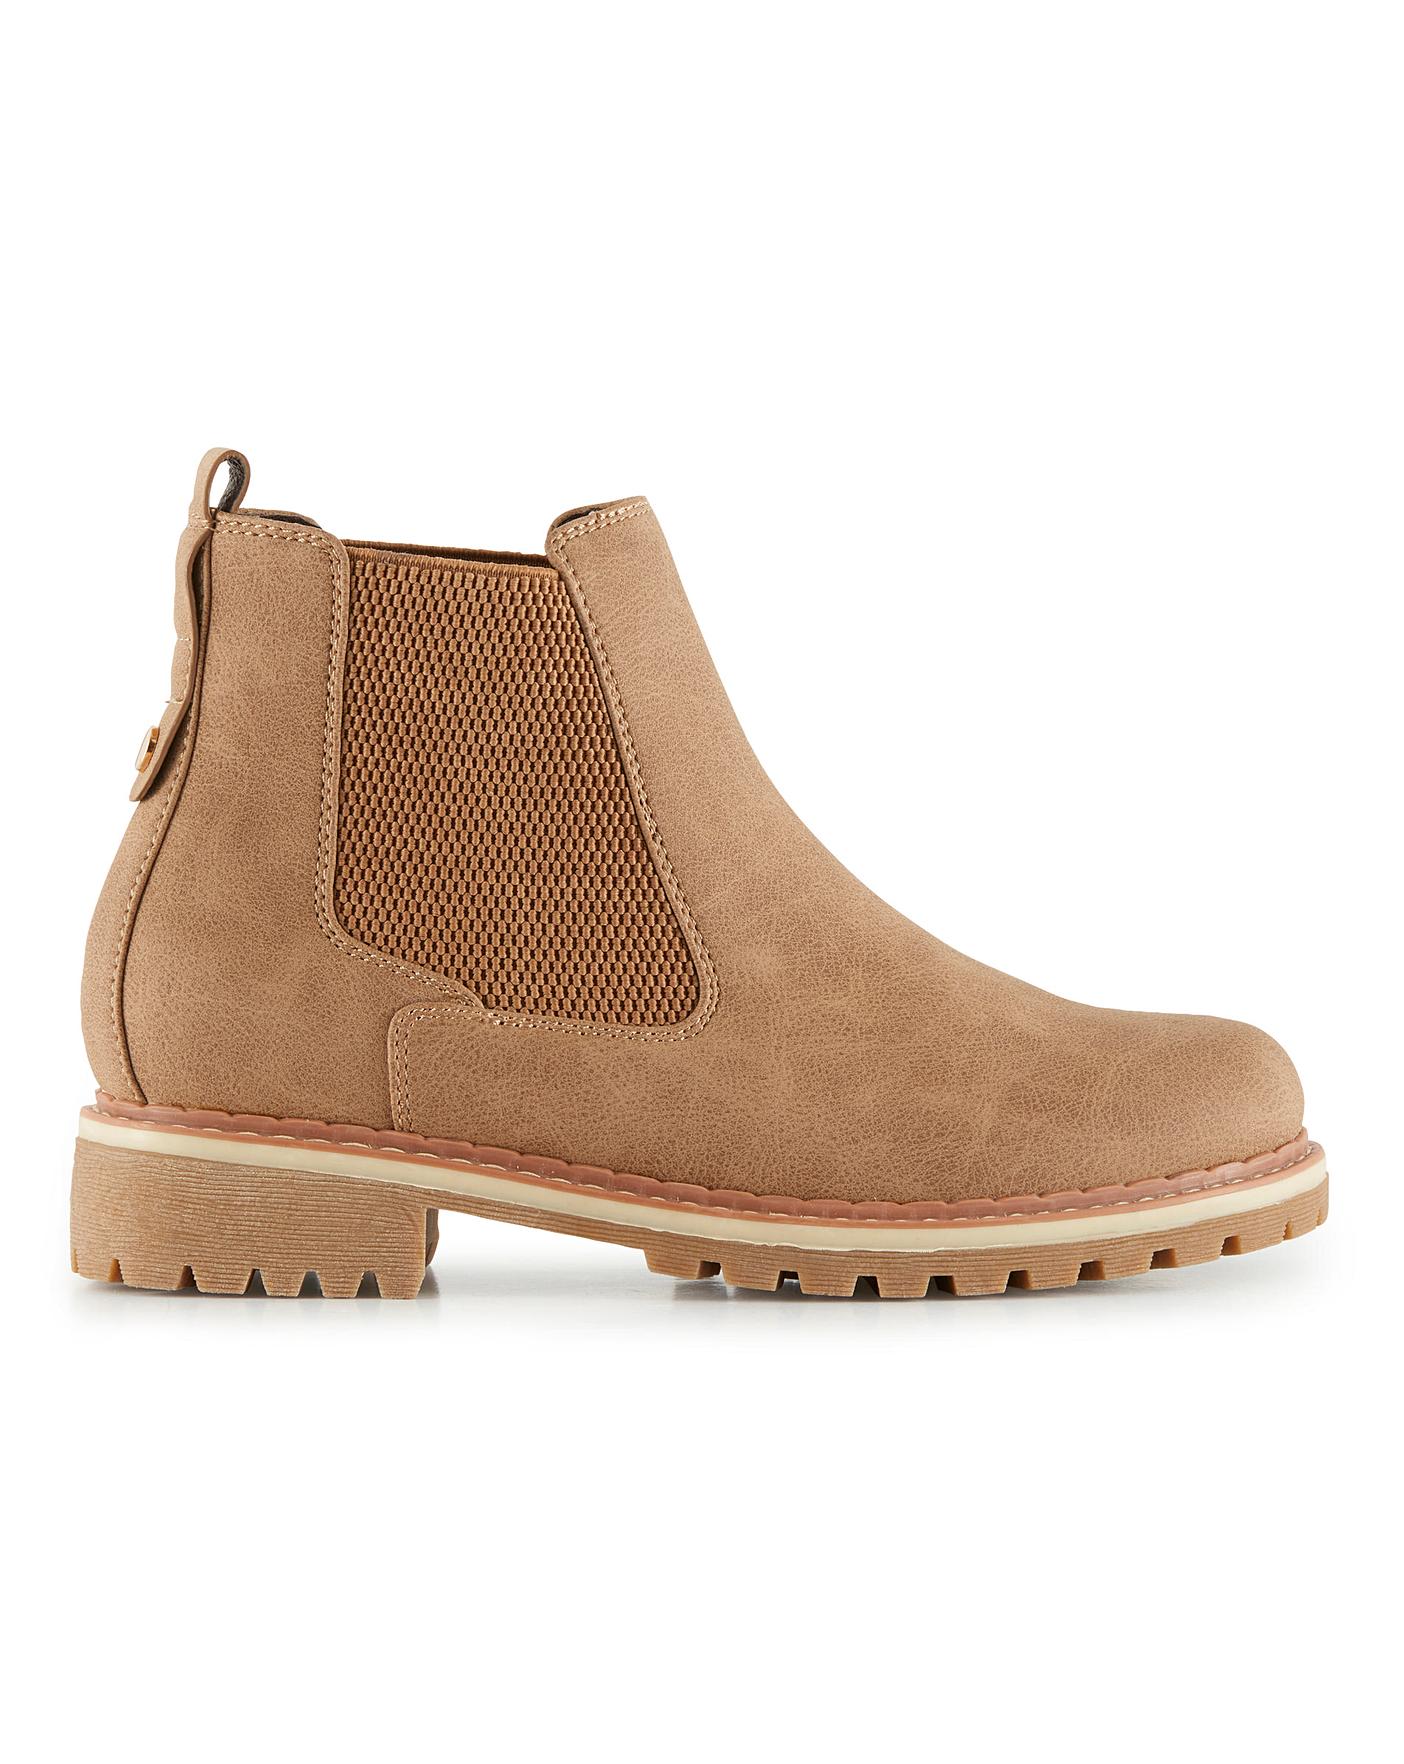 Cleated Sole Chelsea Boots E Fit 